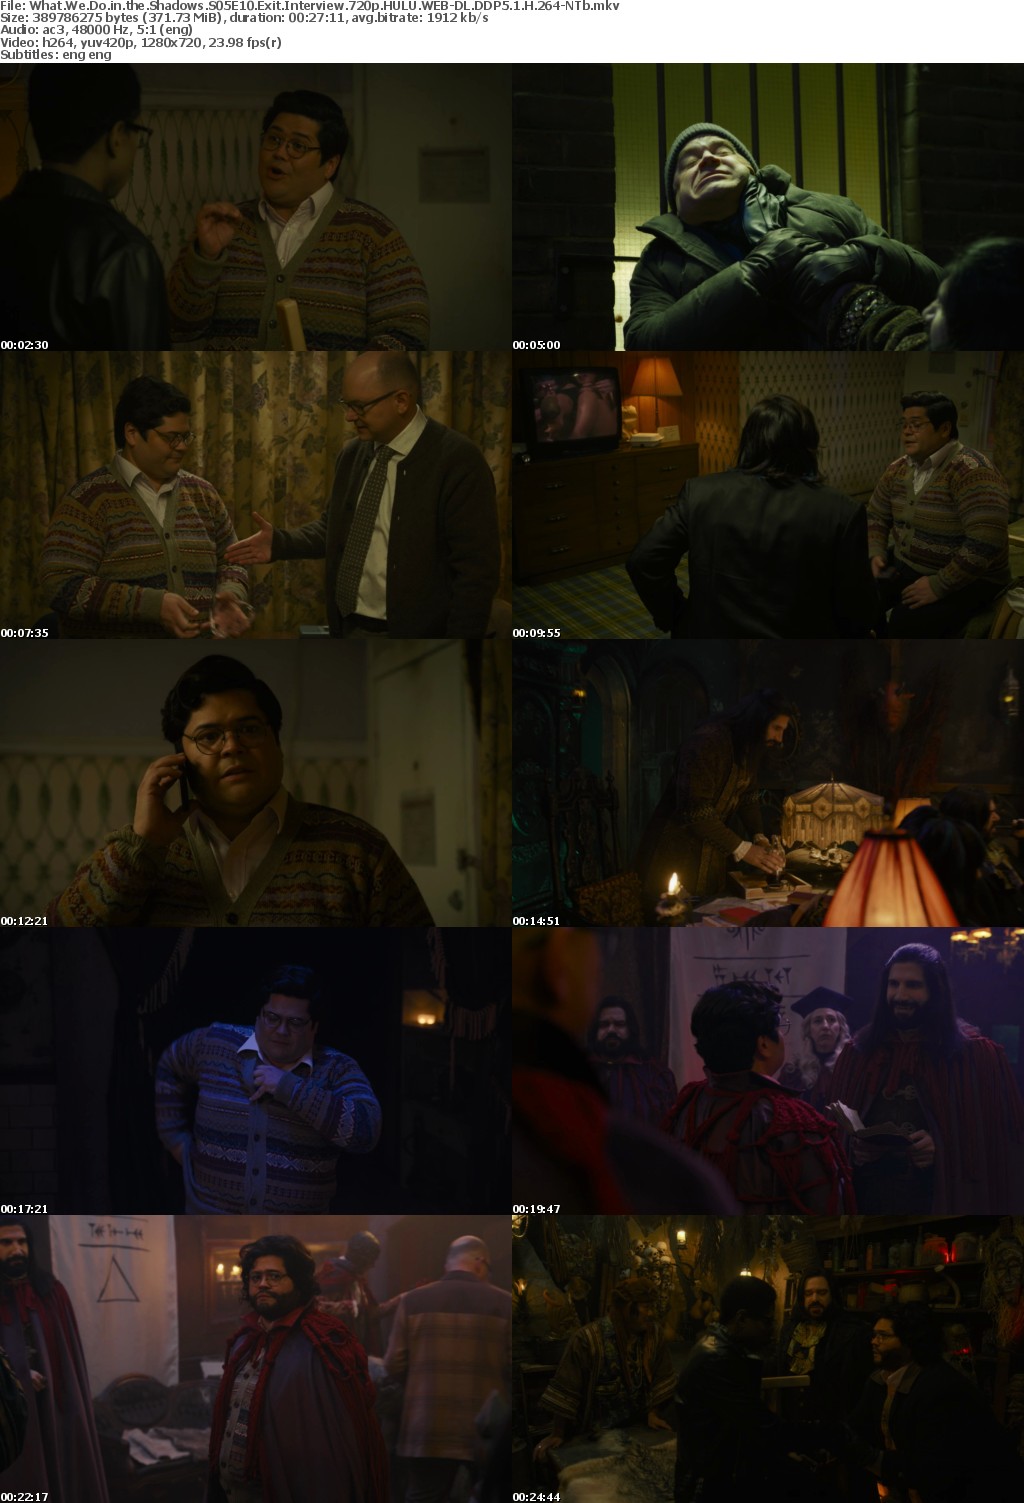 What We Do in the Shadows S05E10 Exit Interview 720p HULU WEB-DL DDP5 1 H 264-NTb